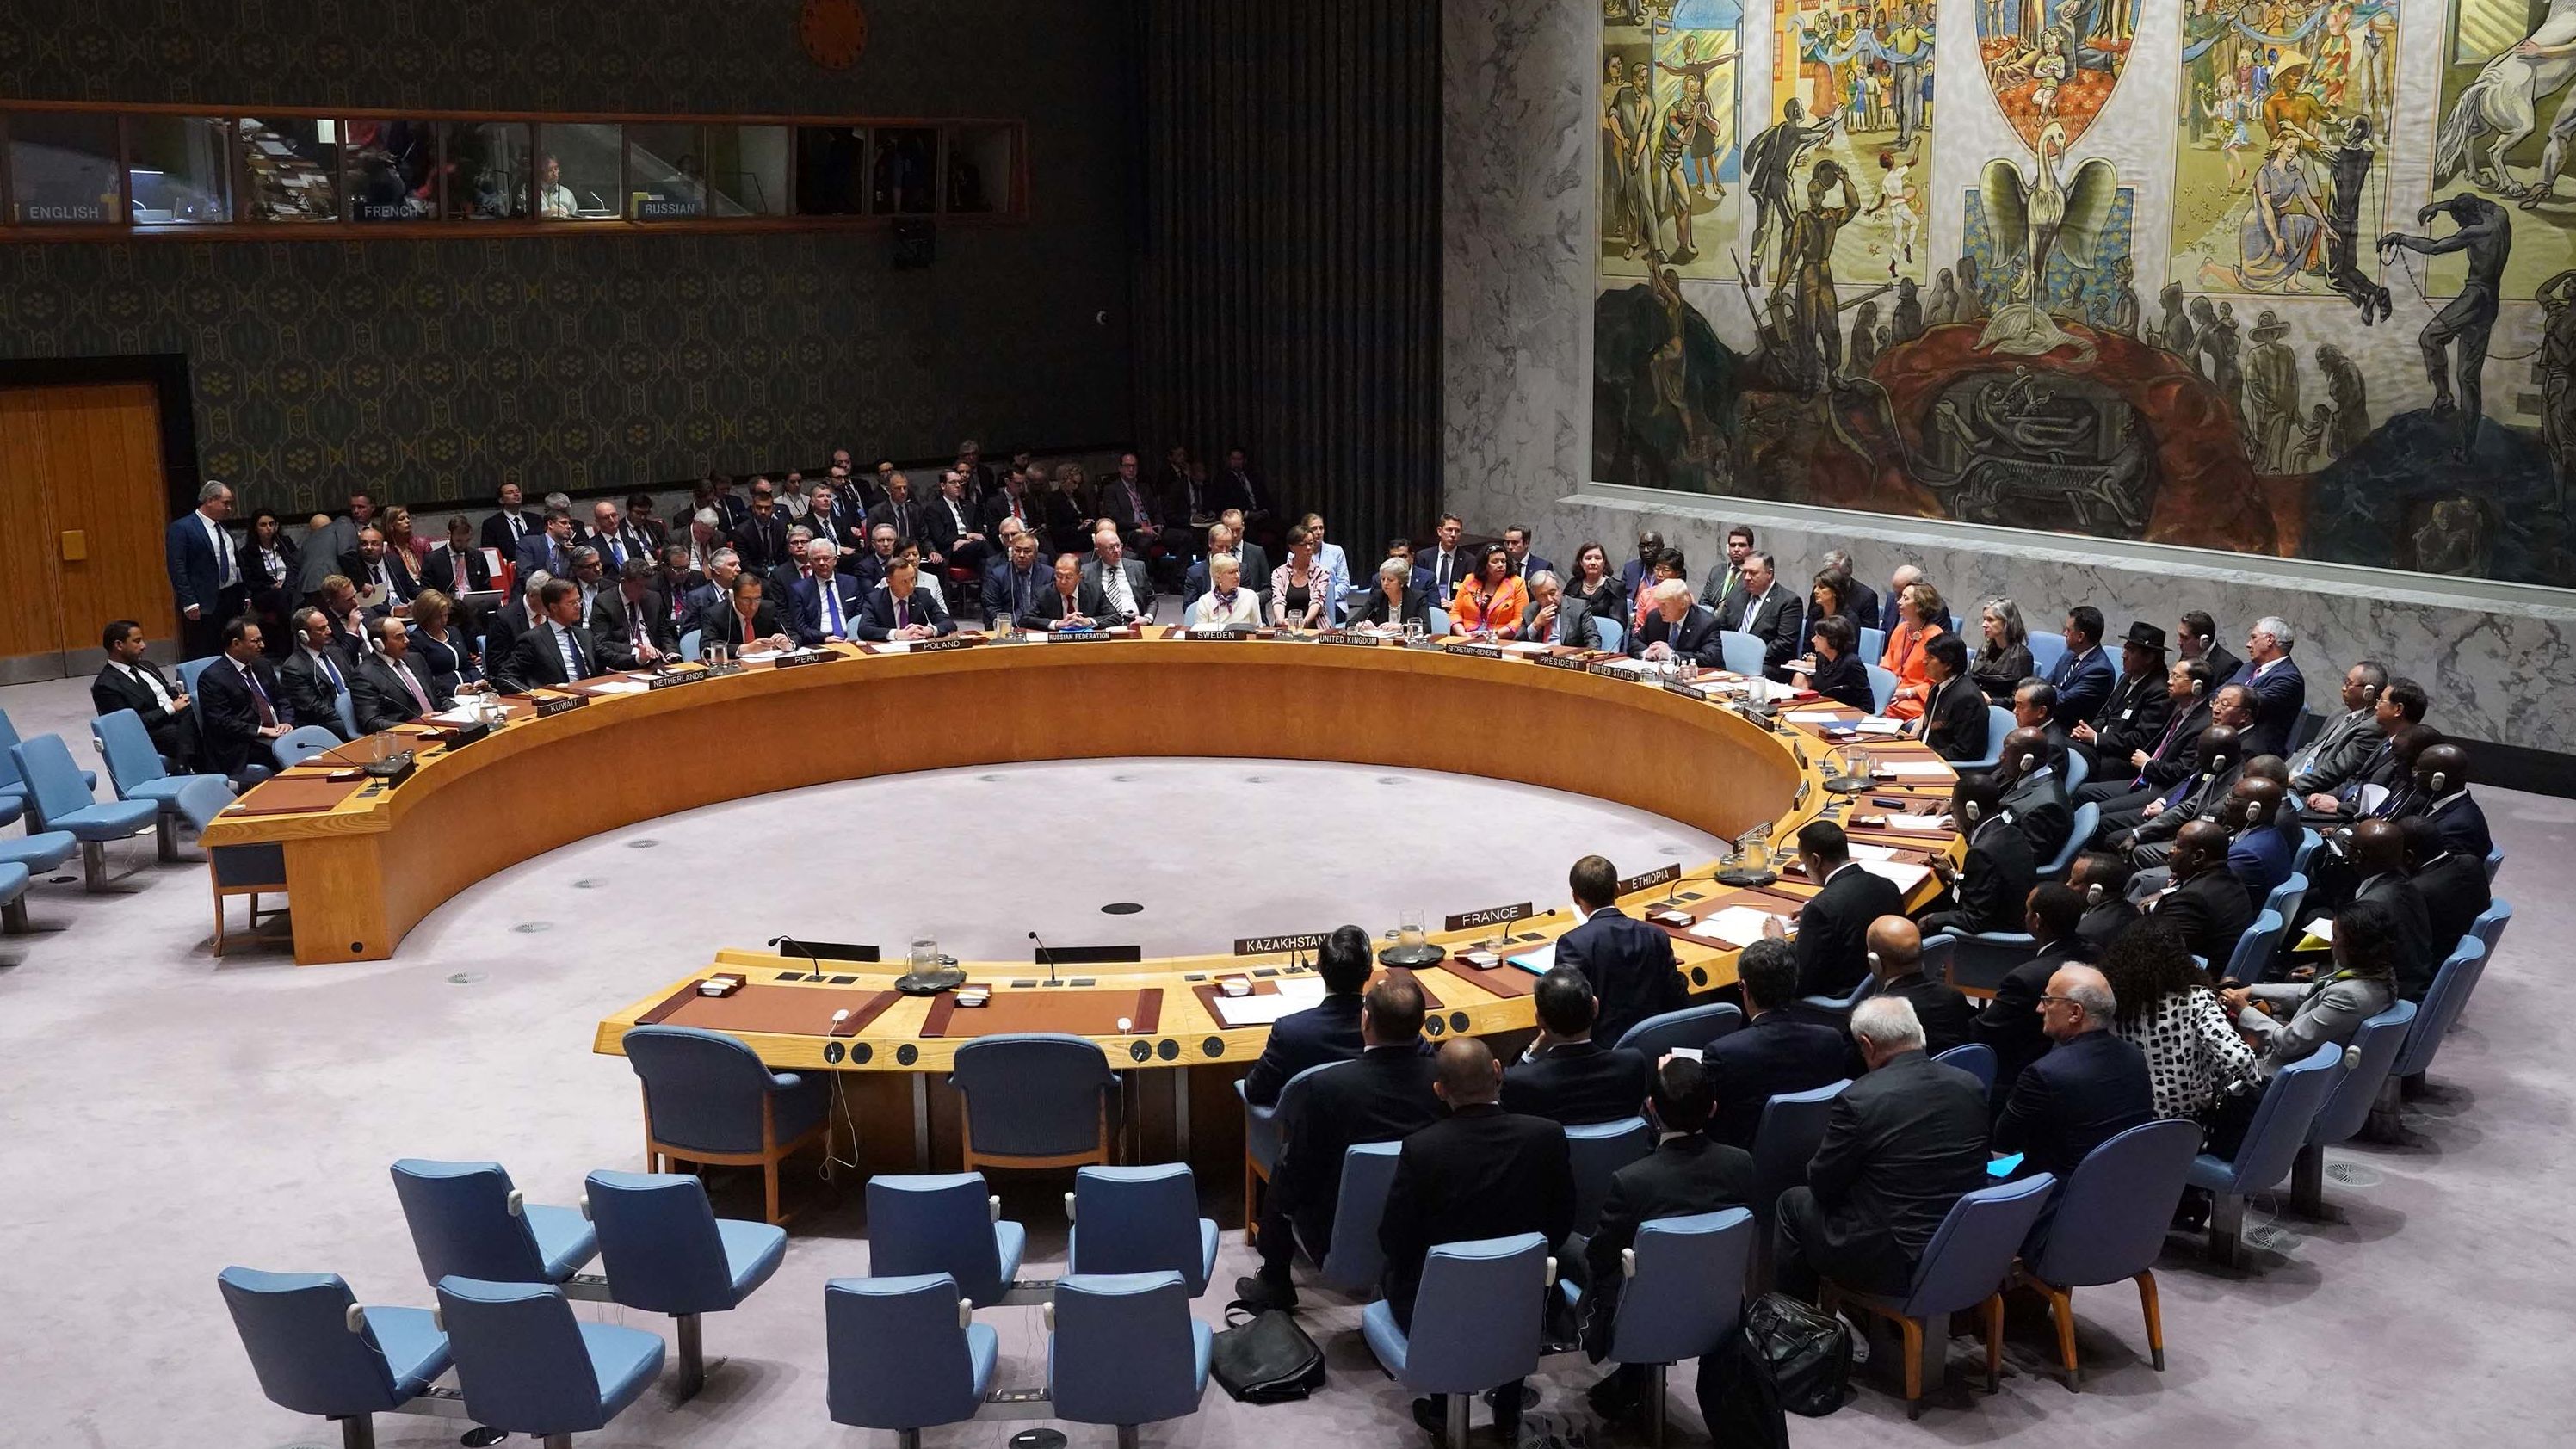 The UN Security Council meets to discuss nonproliferation on Wednesday, September 26.